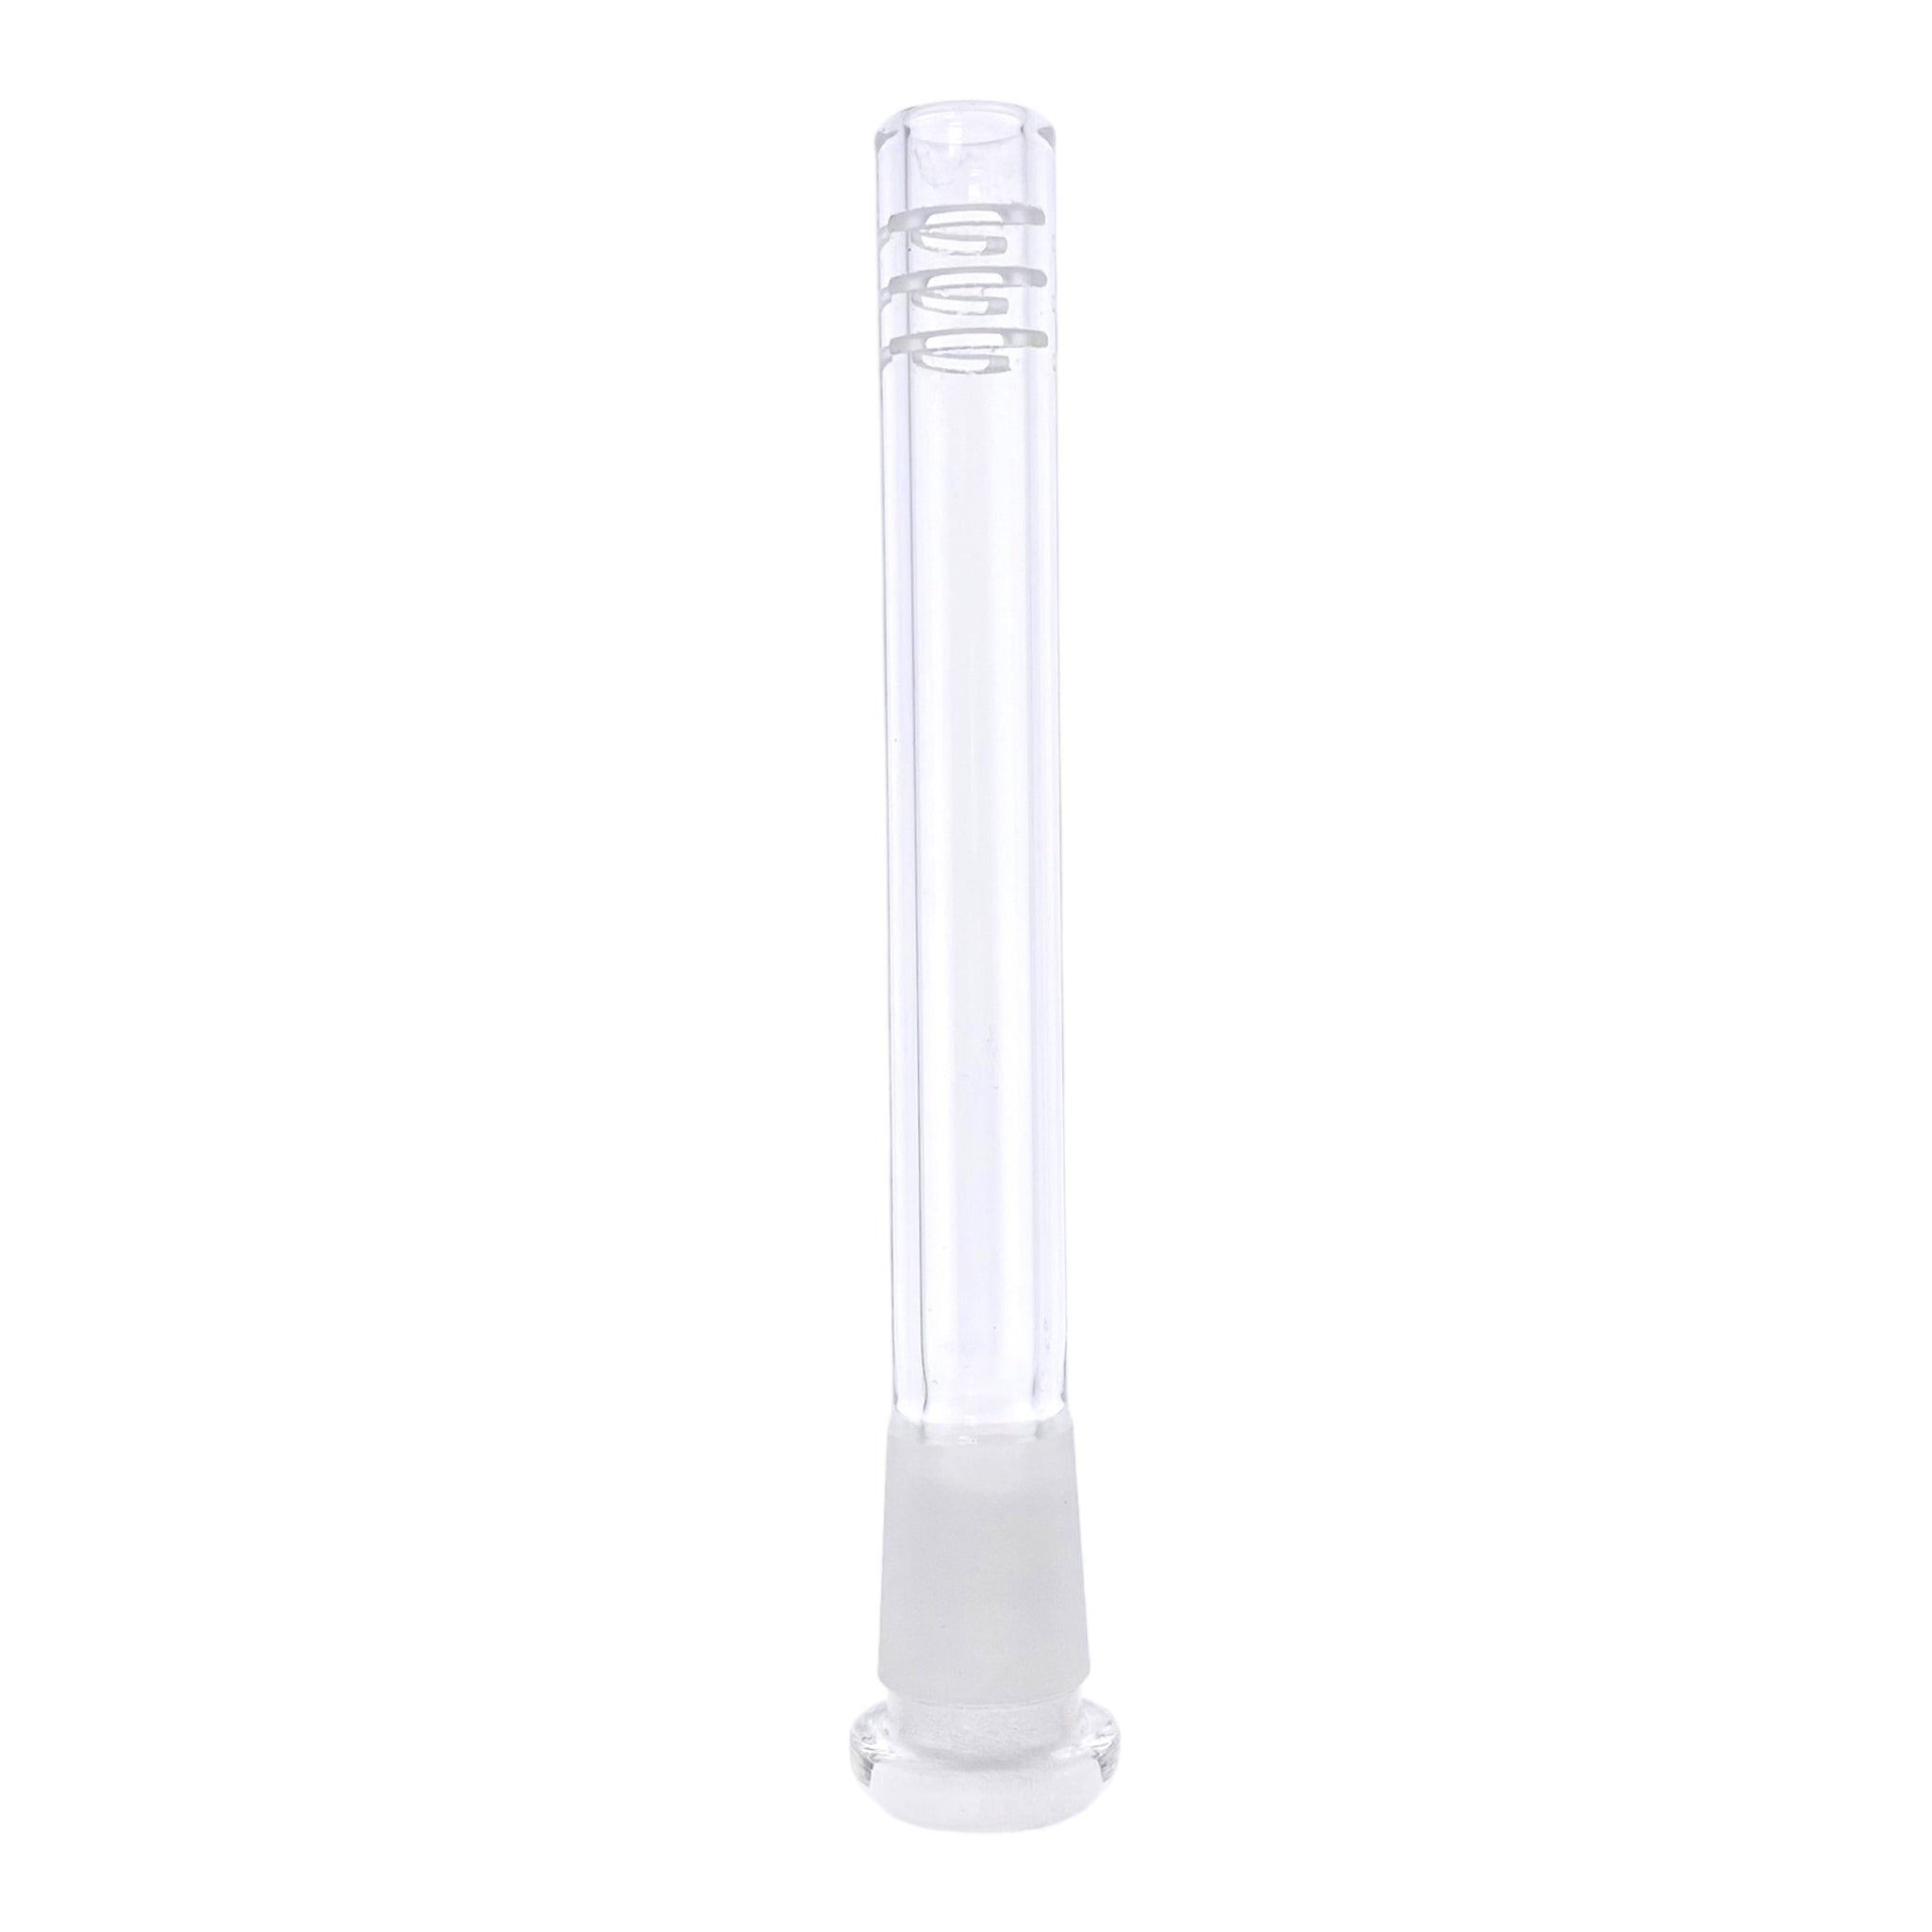 10mm bong downstem for sale online free shipping